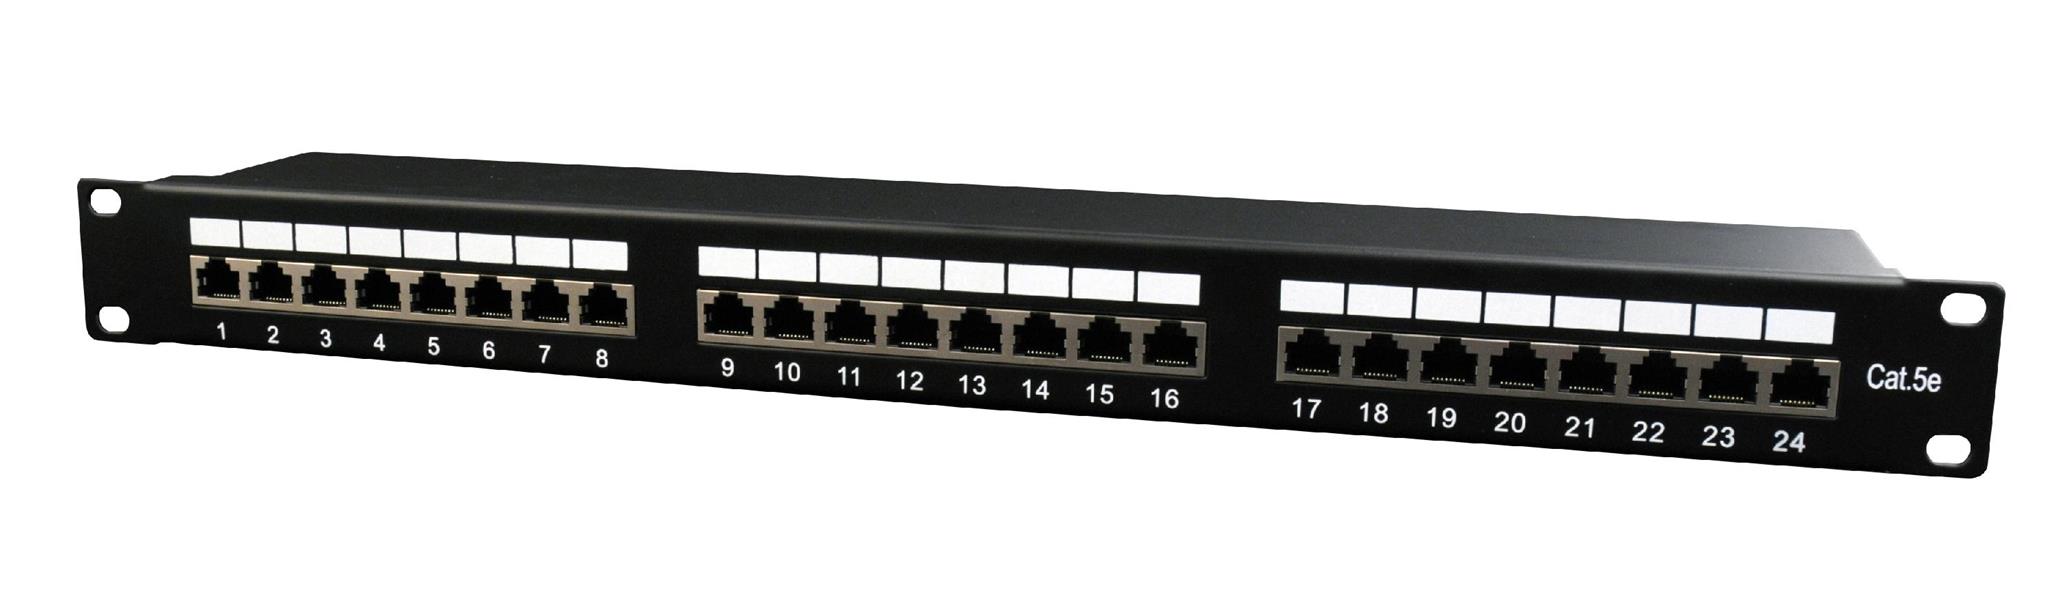 Cat5e 24-poorts patchpanel